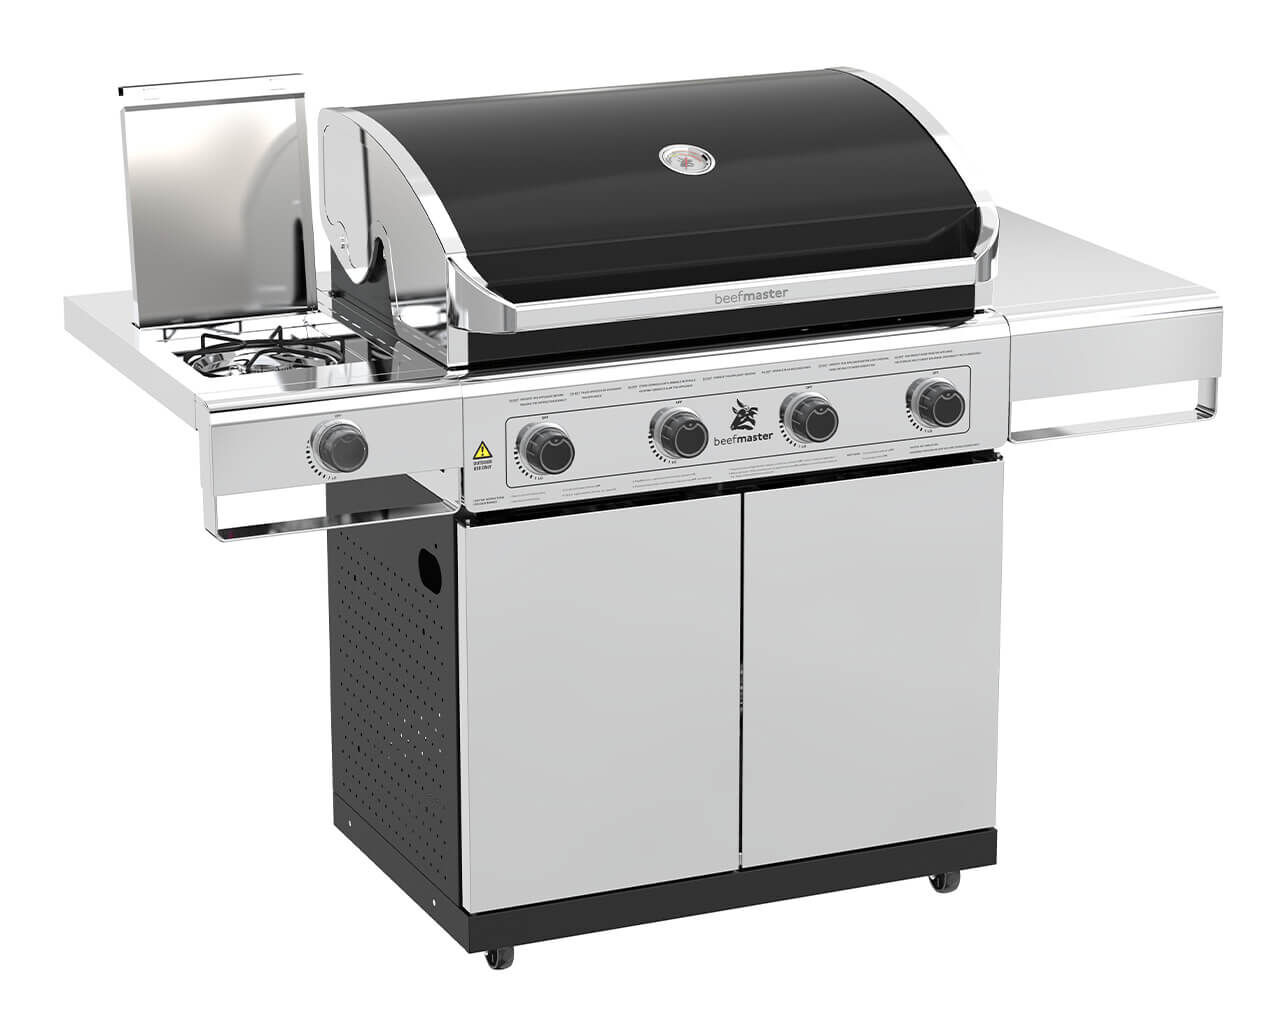 Beefmaster Classic 4 Burner BBQ on Deluxe Cart with Stainless Steel Side Burner